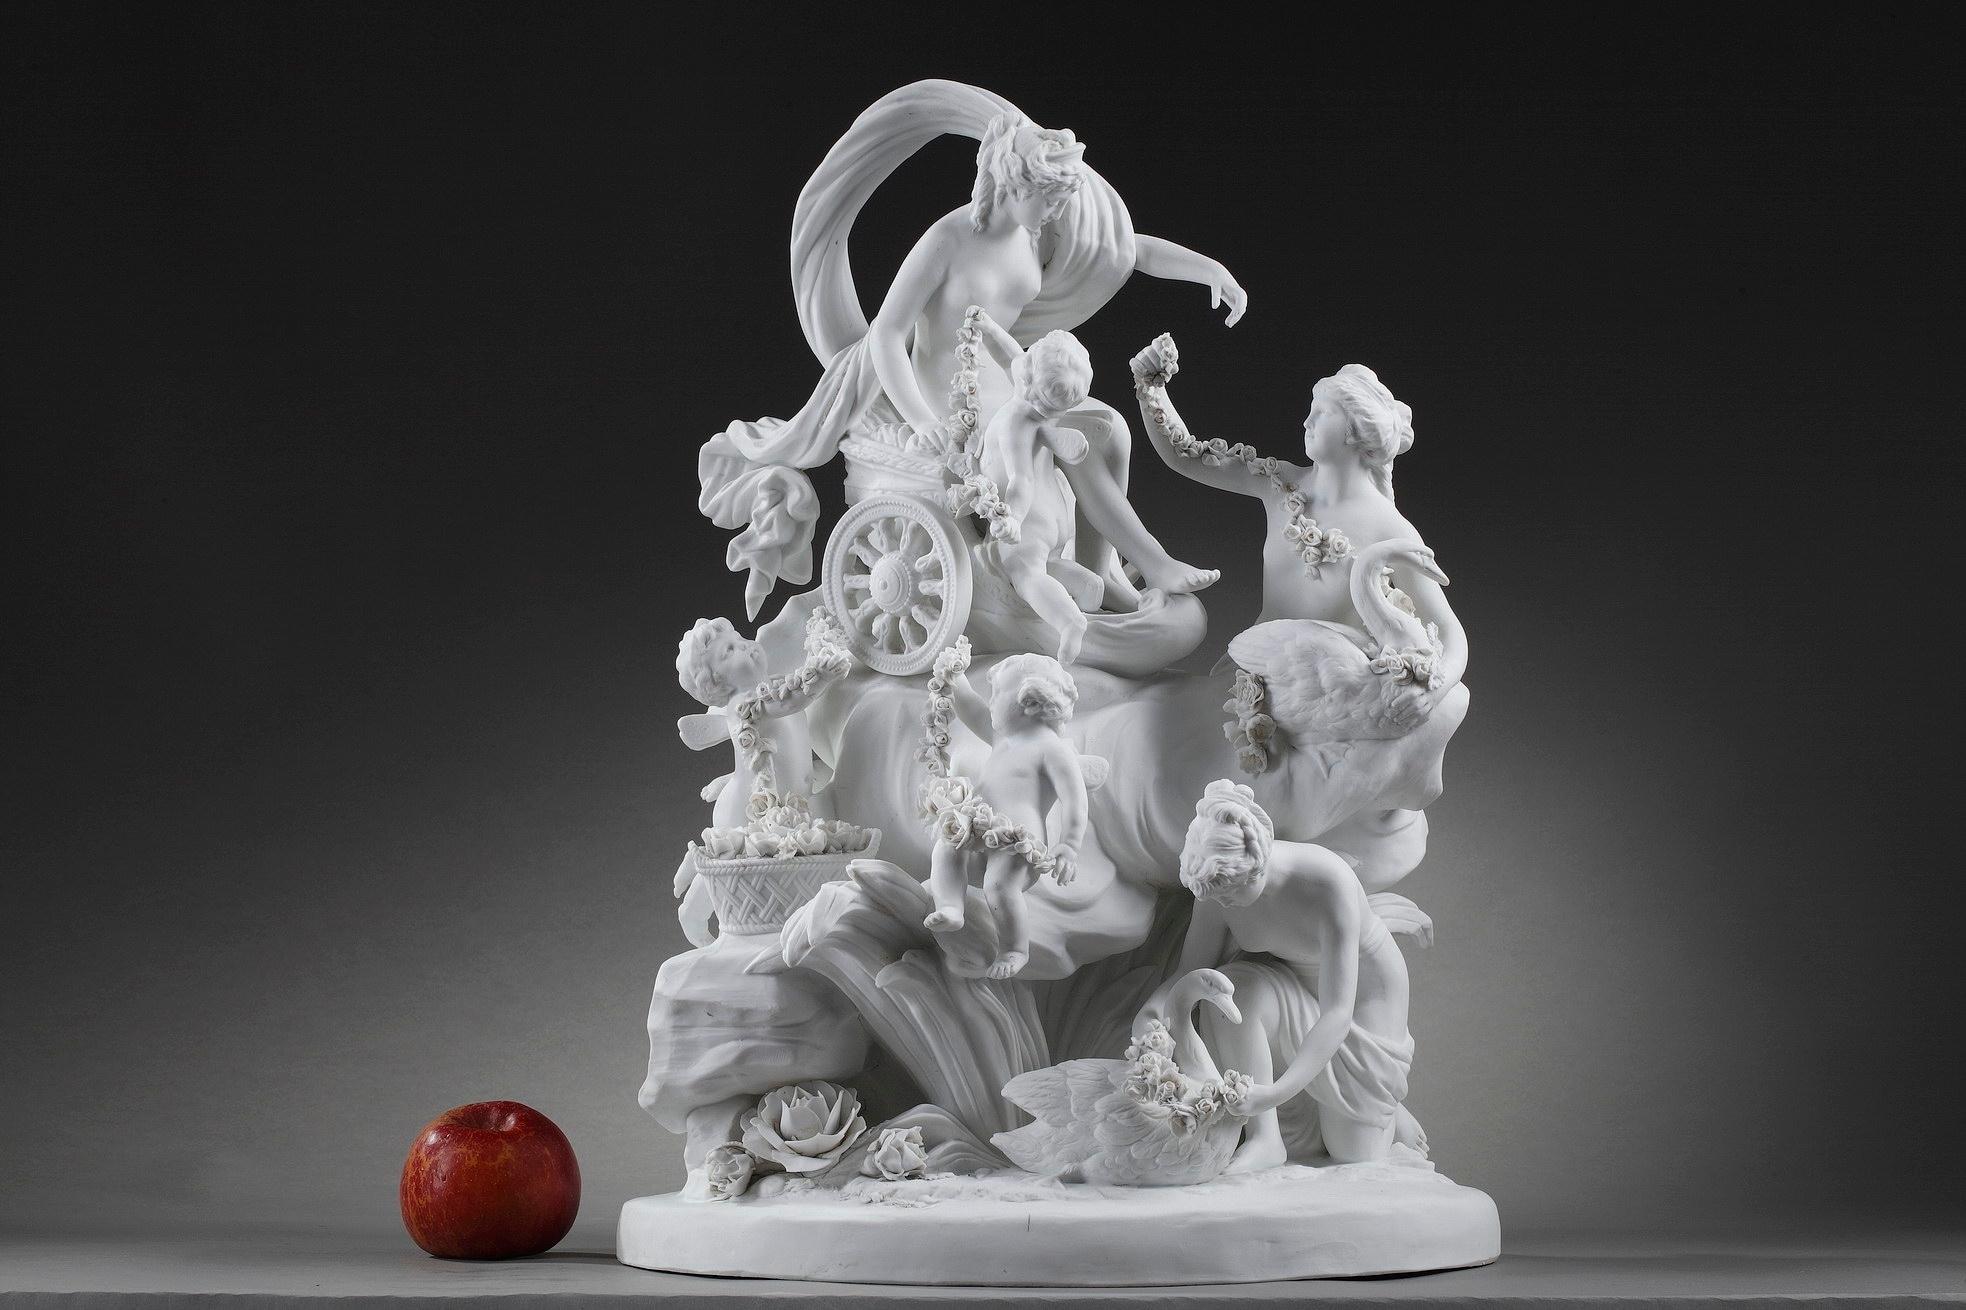 Large porcelain bisque group featuring the triumphant figure of the goddess Aphrodite (Venus) on her chariot, surrounded by Cupids and Nereids with swans. The nymphs and putti reach to the goddess garlands of roses as symbol of glory. Two Cupids in